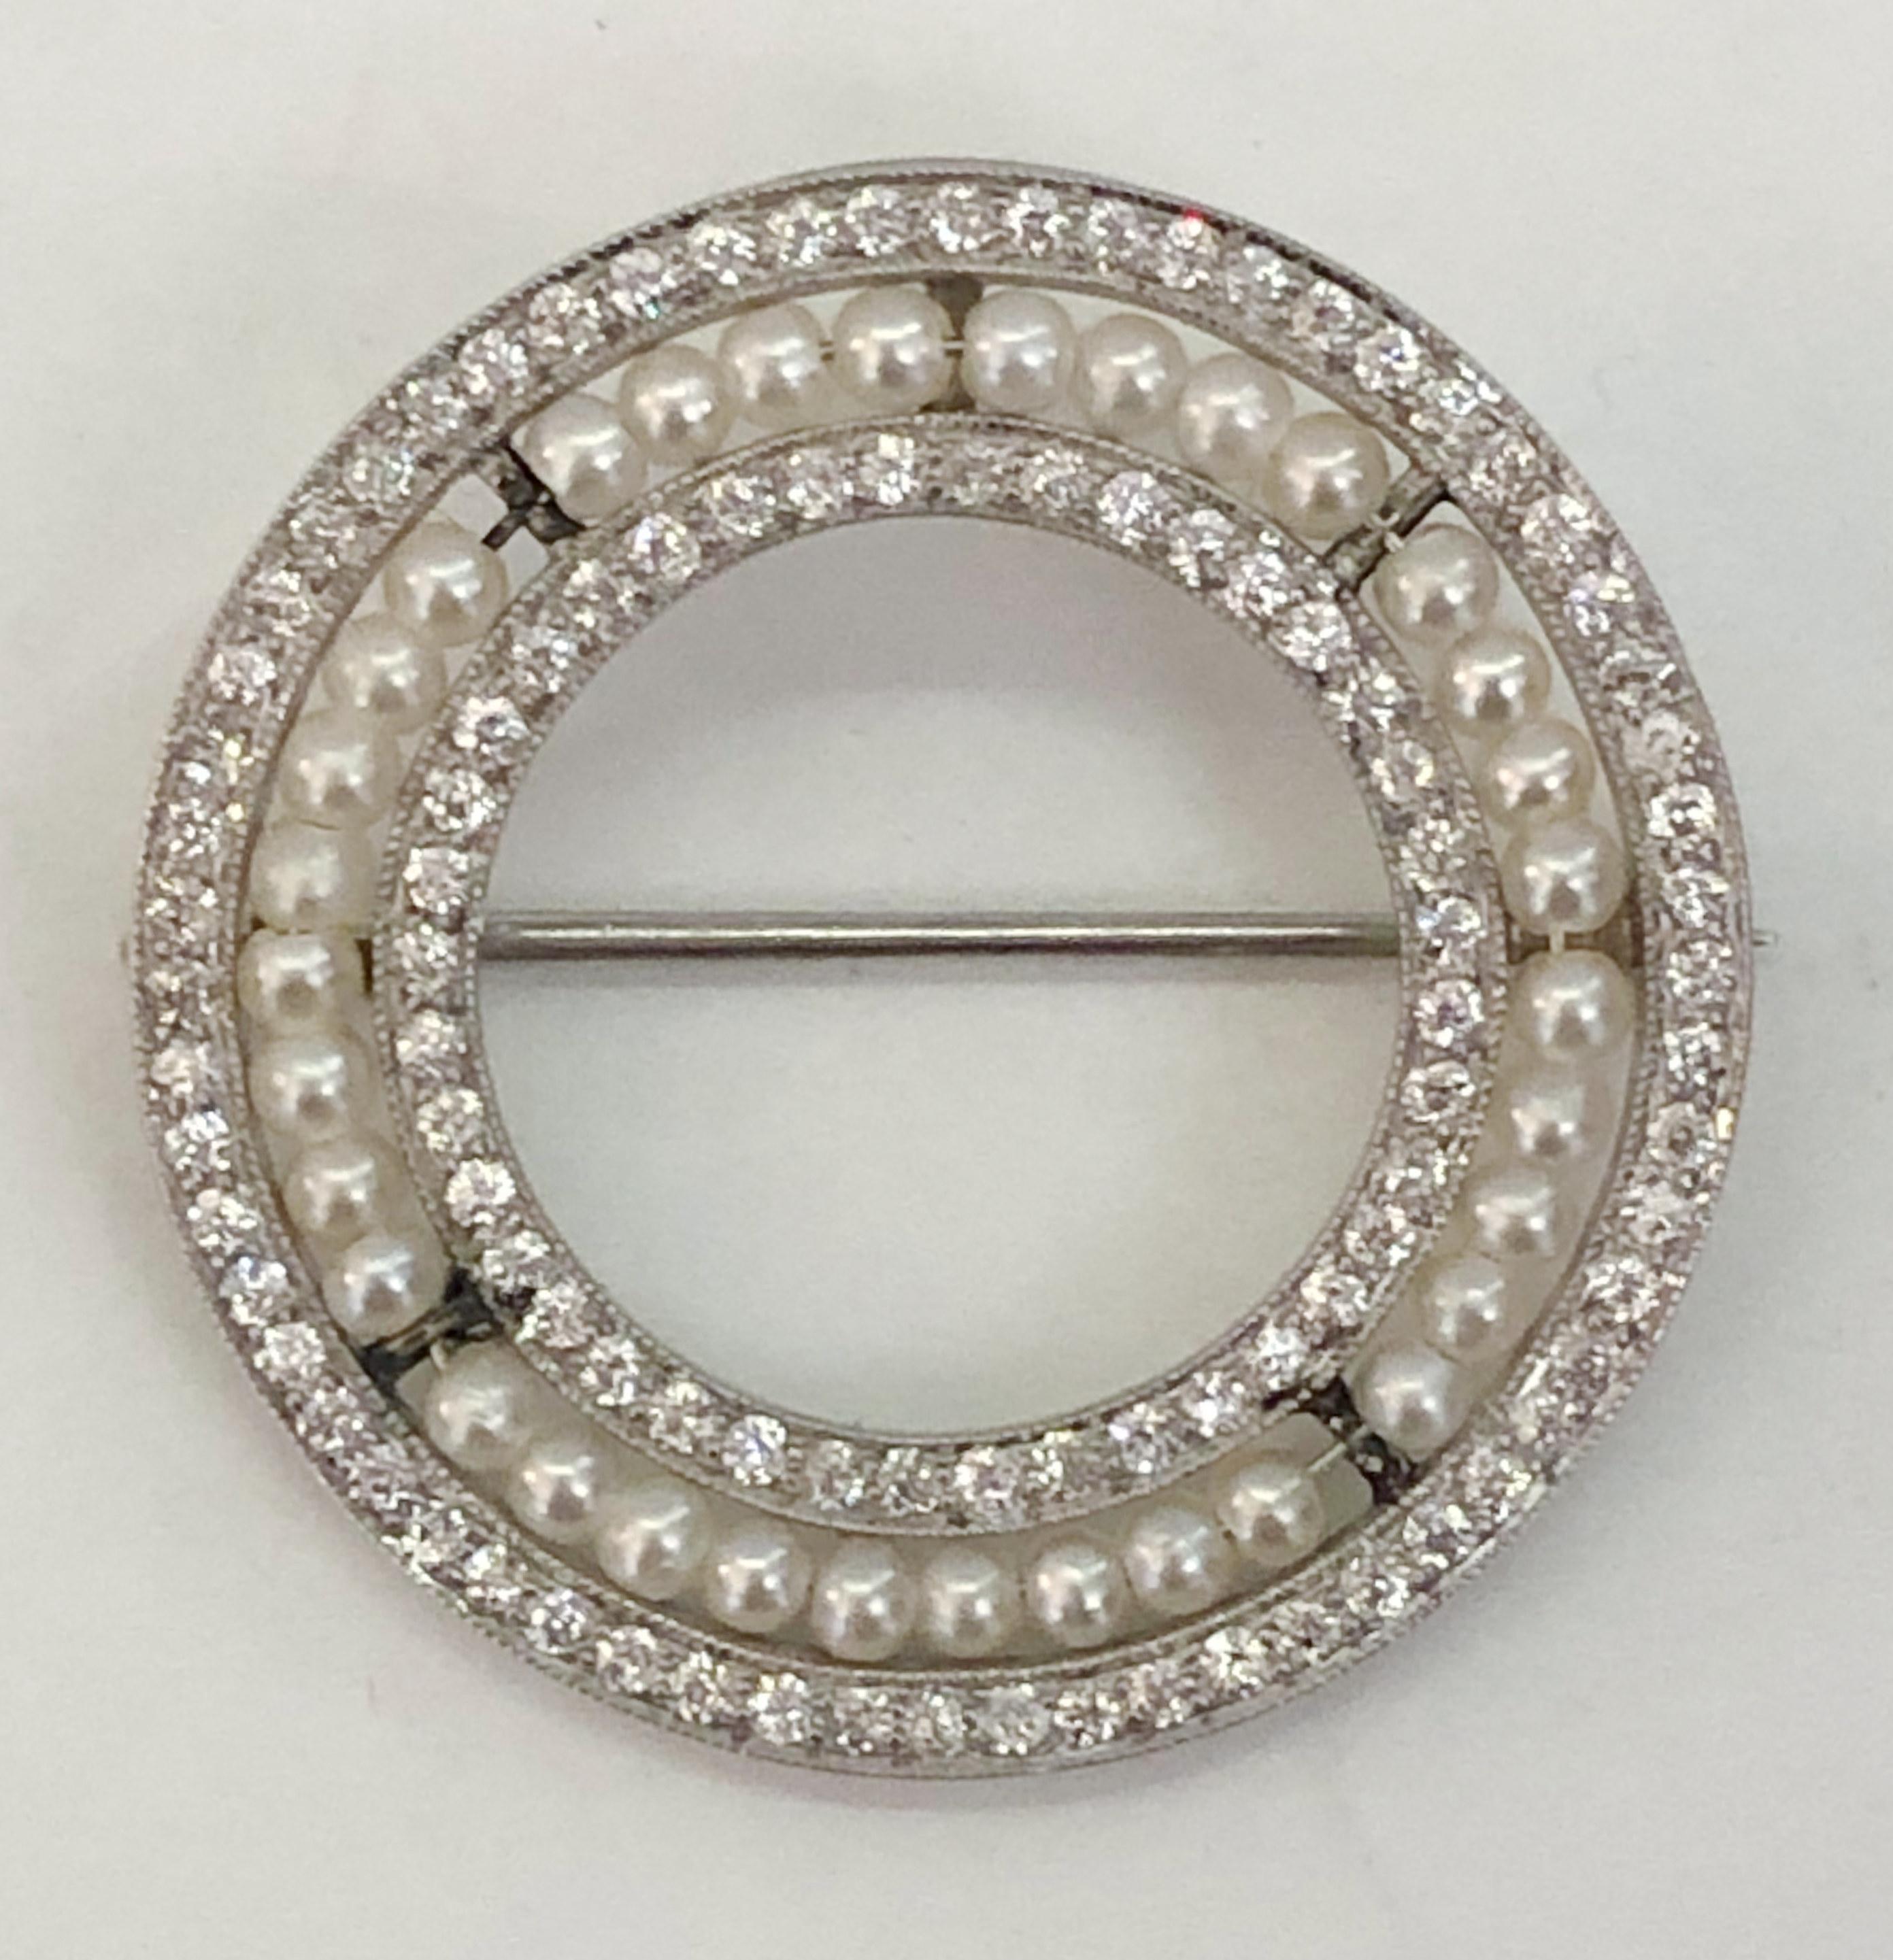 Vintage round platinum brooch, with approximately 1 karat of diamonds alternating with beads, Italy 1910-1920s 
Diameter 3.2cm